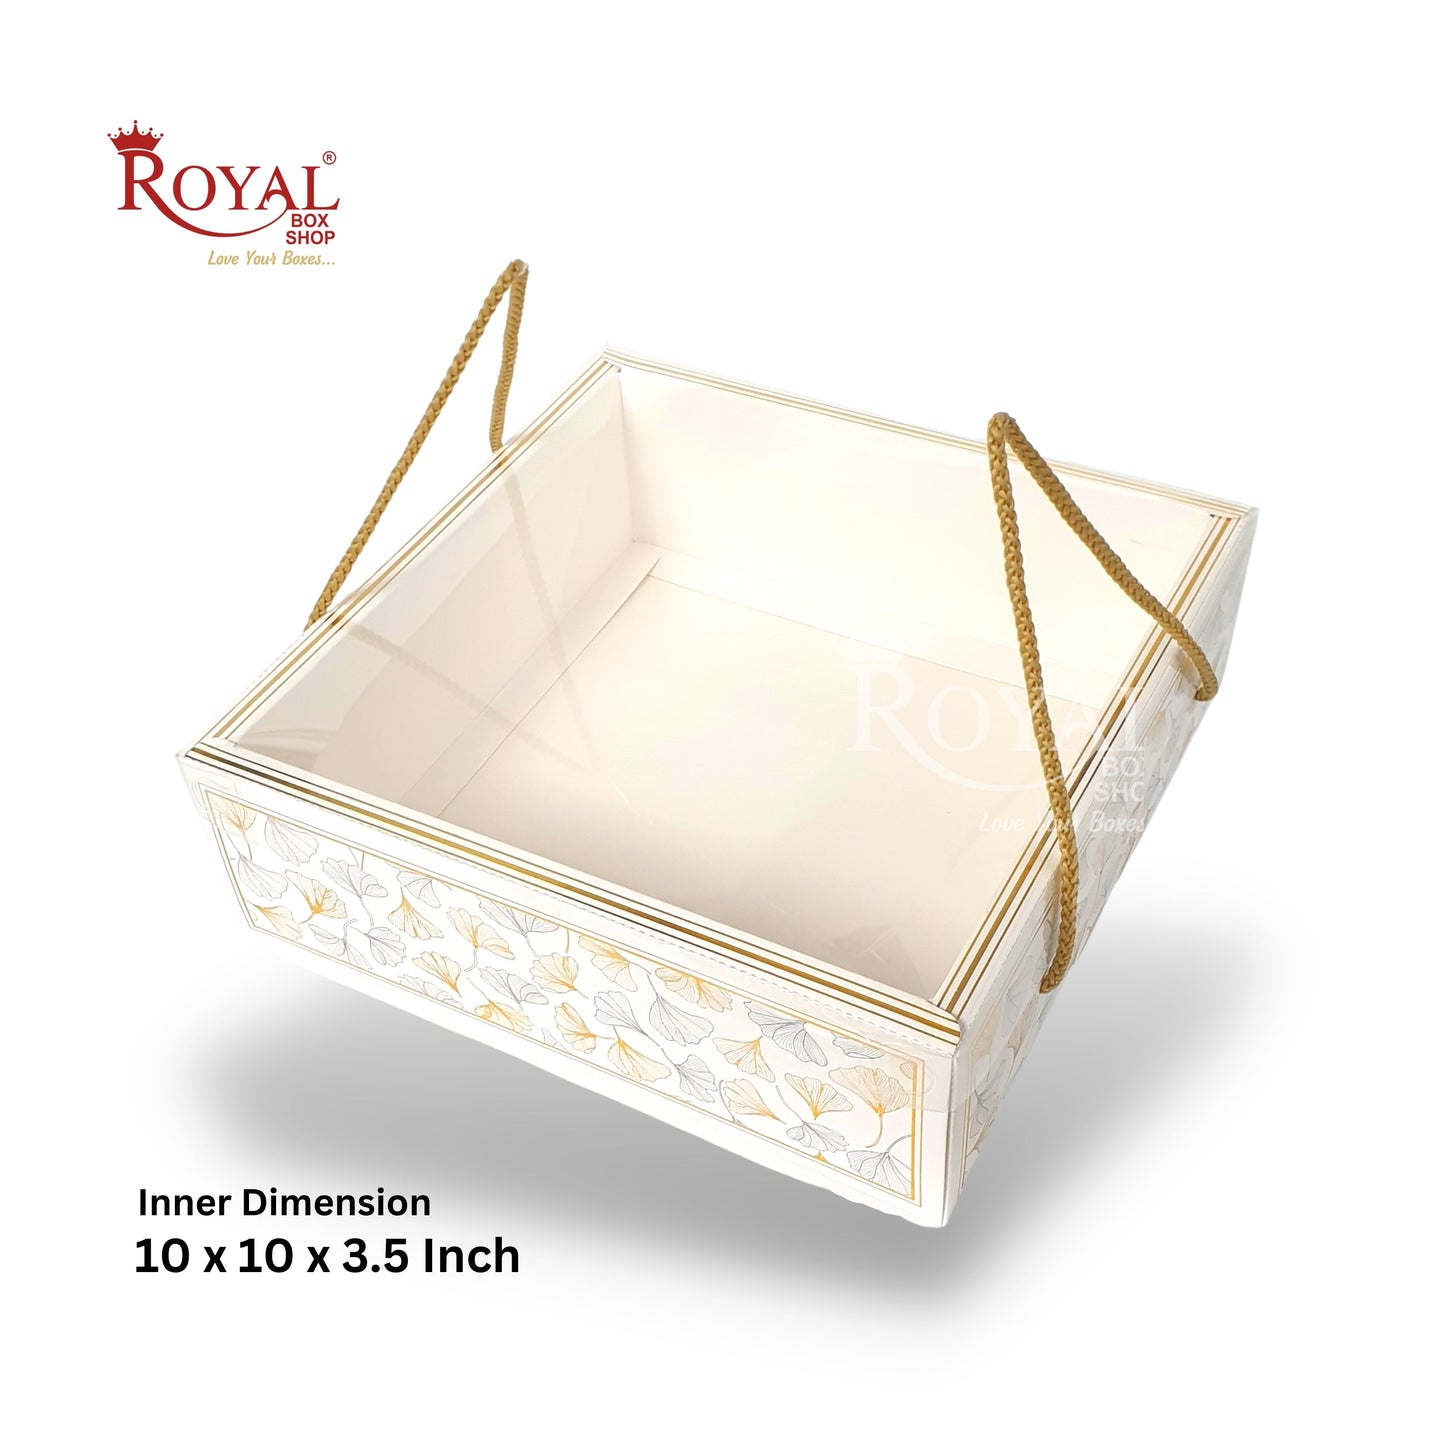 Premium Gift Hamper Bags with Transparent Lid I 10 x 10 x 3.5 inches I White Golden leaf I Christmas Gifting, Party Gifts, Return favor Gifting Royal Box Shop